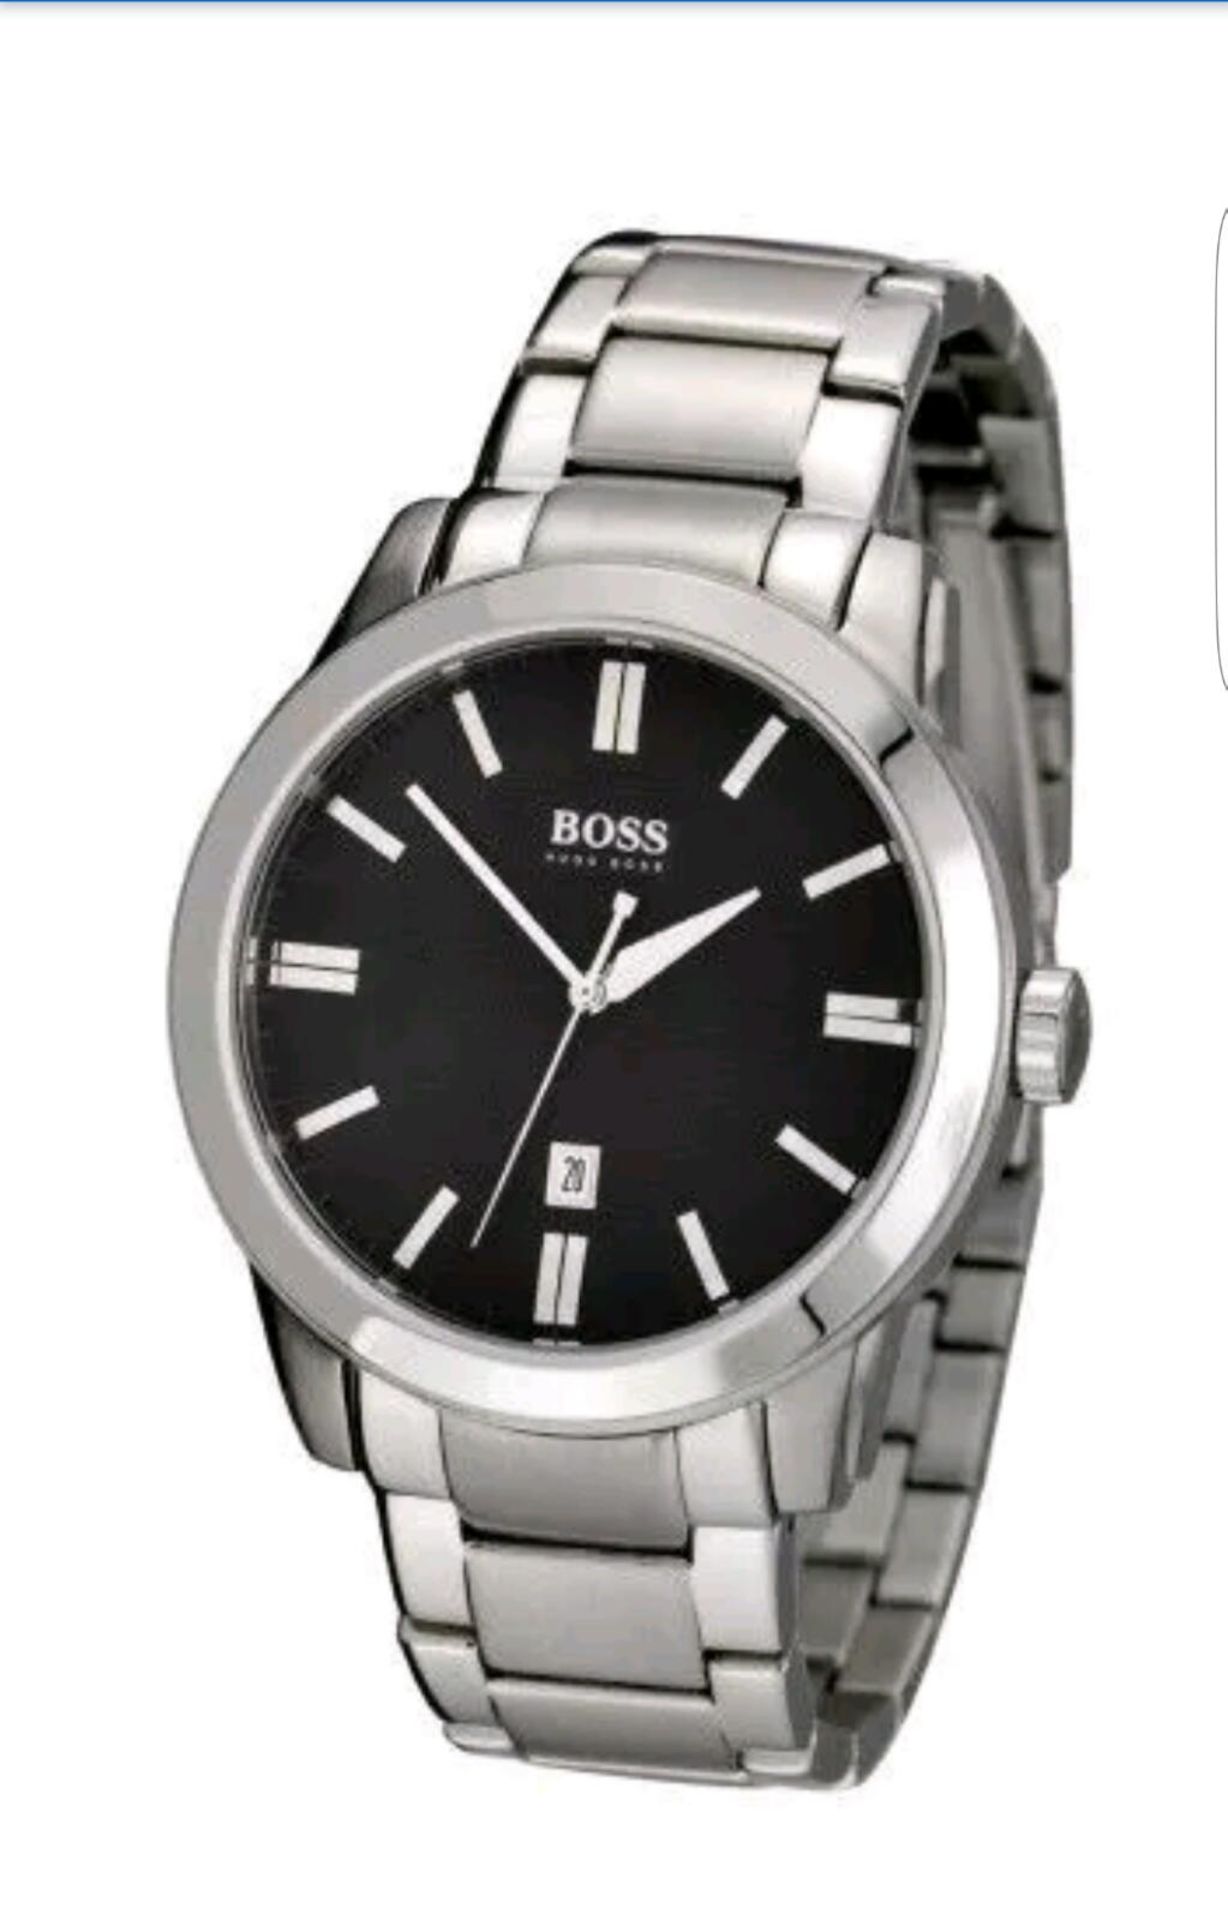 BRAND NEW GENTS HUGO BOSS WATCH, HB1512769, COMPLETE WITH ORIGINAL BOX AND MANUAL - RRP £399